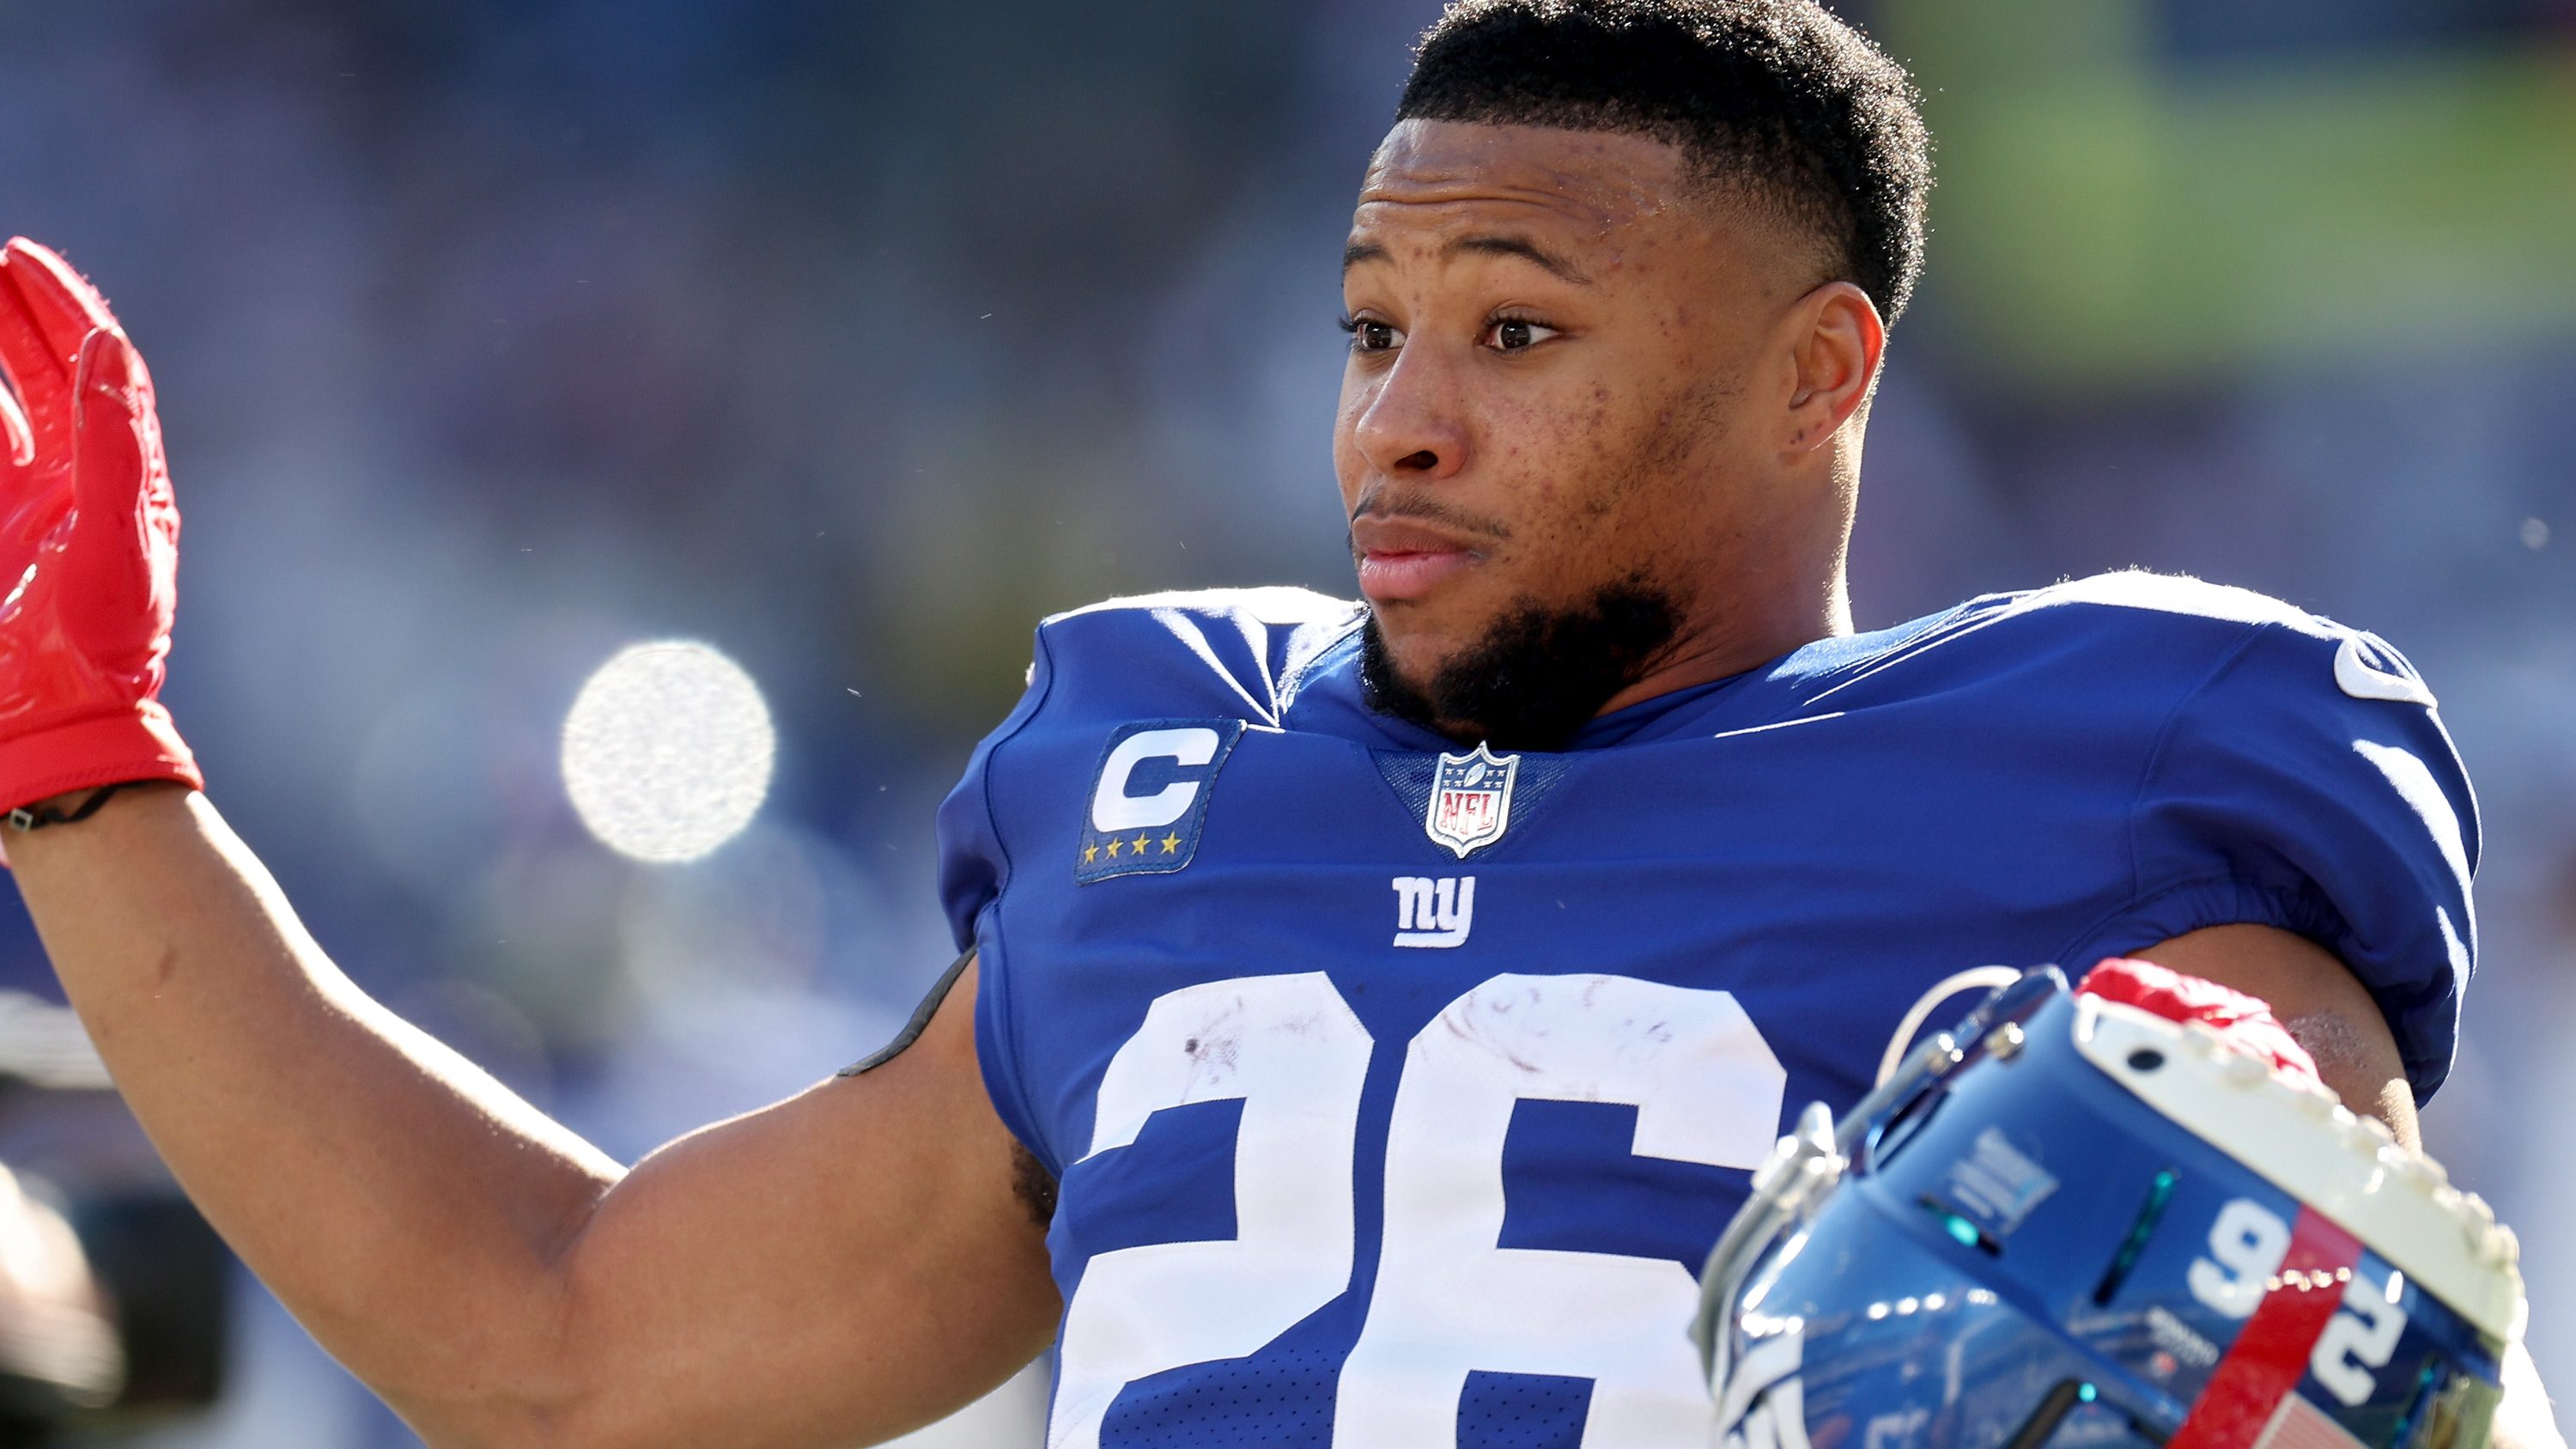 Why Saquon Barkley agreed to Giants' deal - ESPN